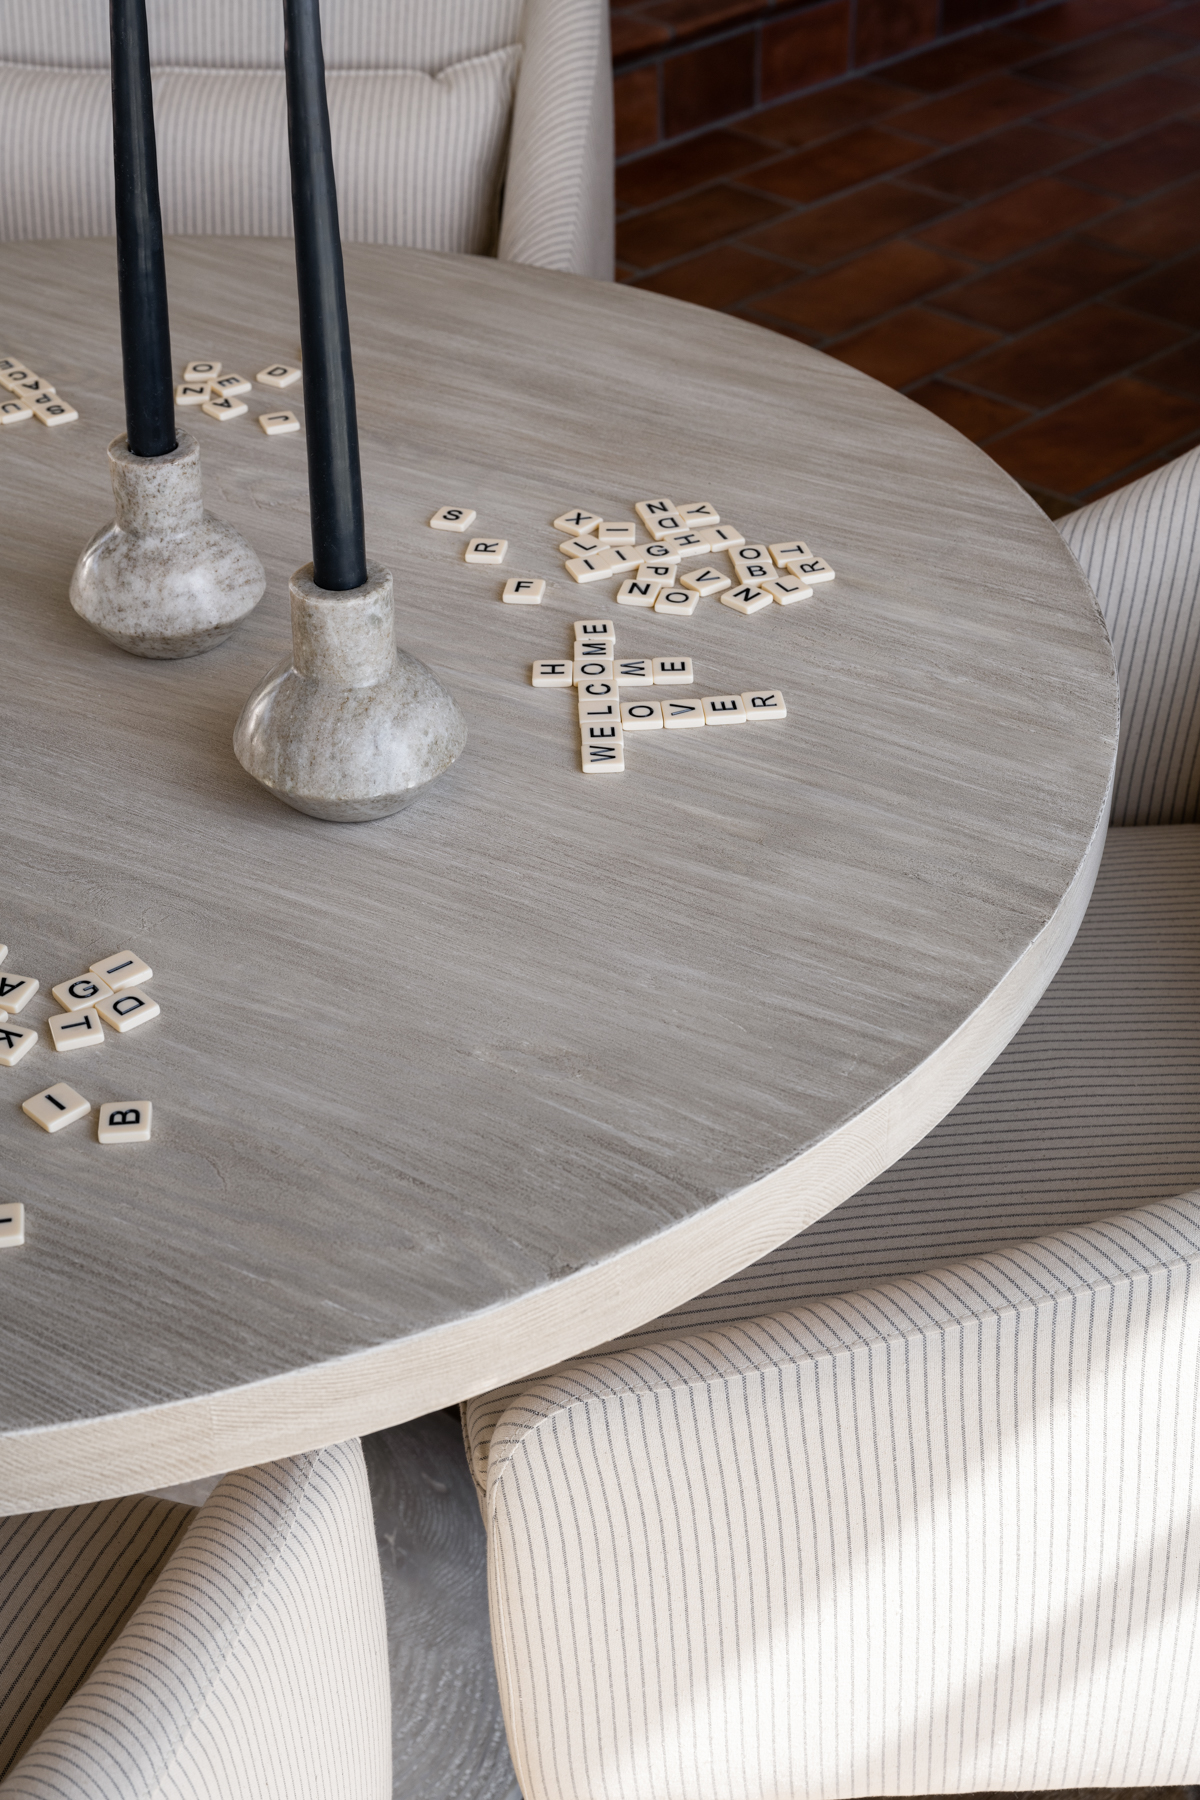 living room with round game table with scrabble